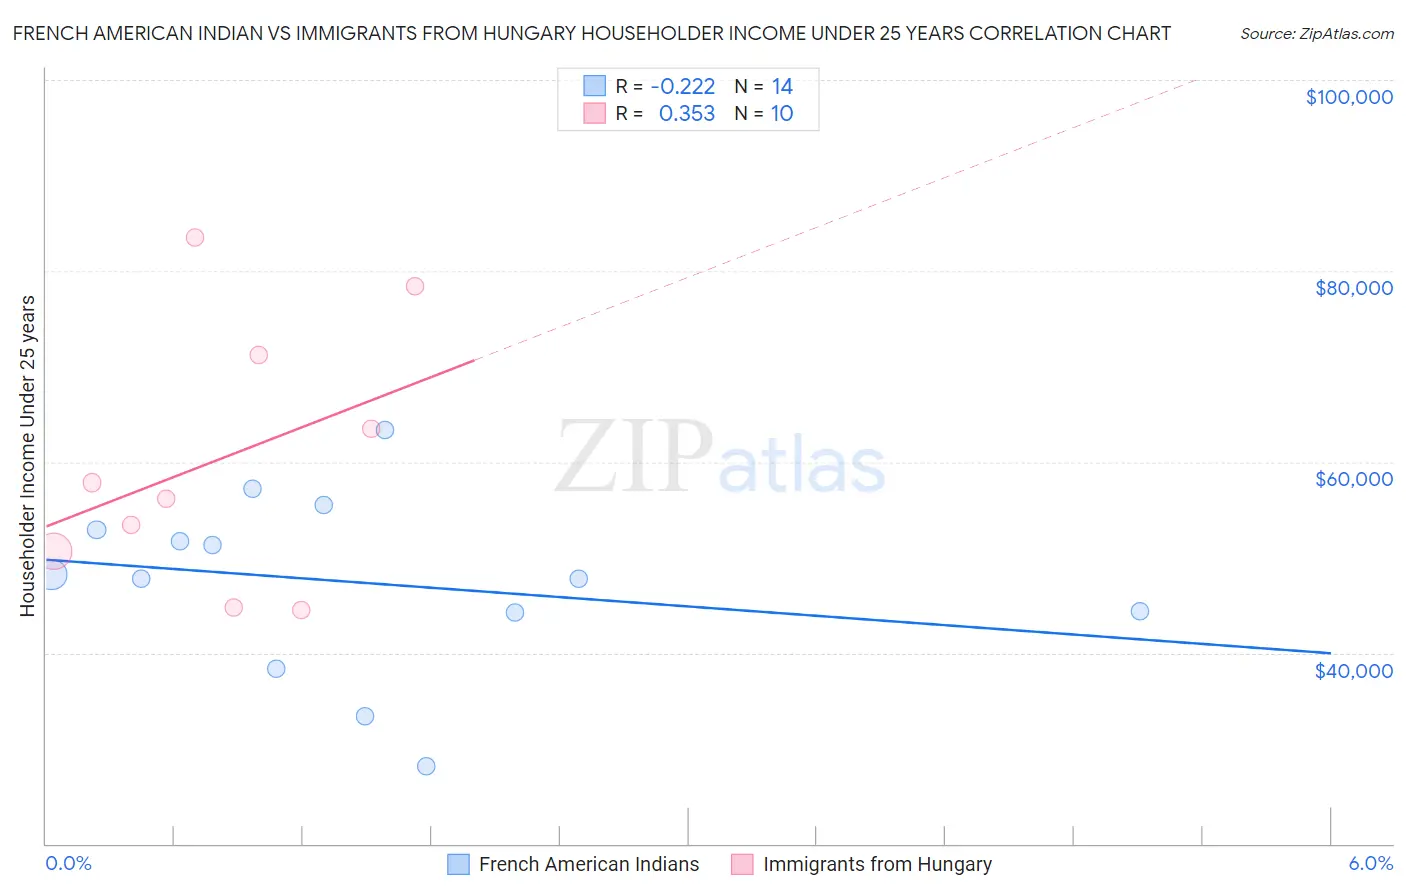 French American Indian vs Immigrants from Hungary Householder Income Under 25 years